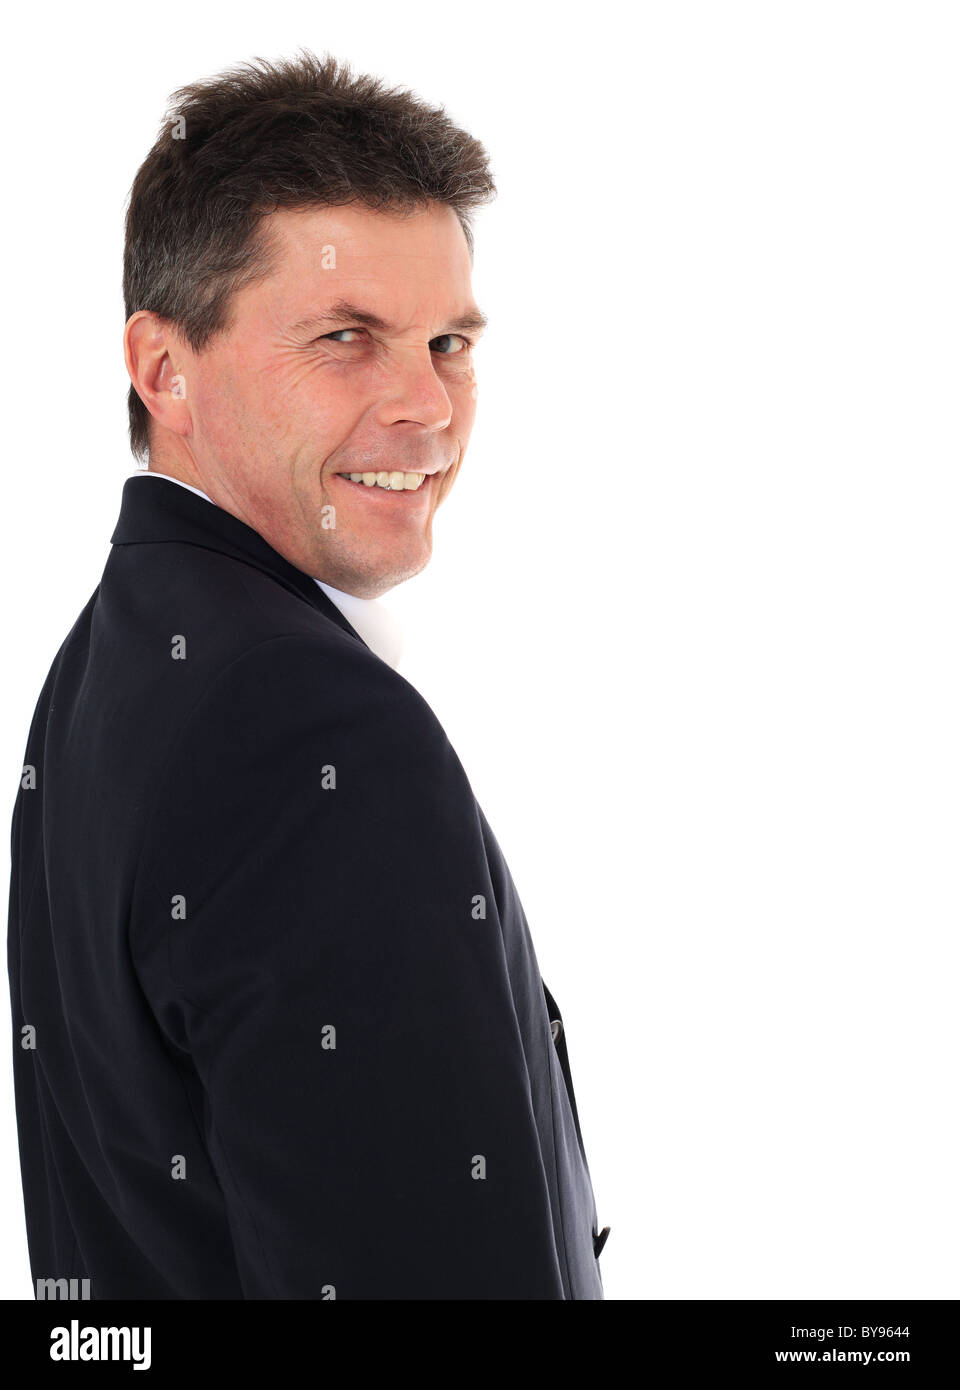 Attractive middle-aged man. All on white background. Stock Photo